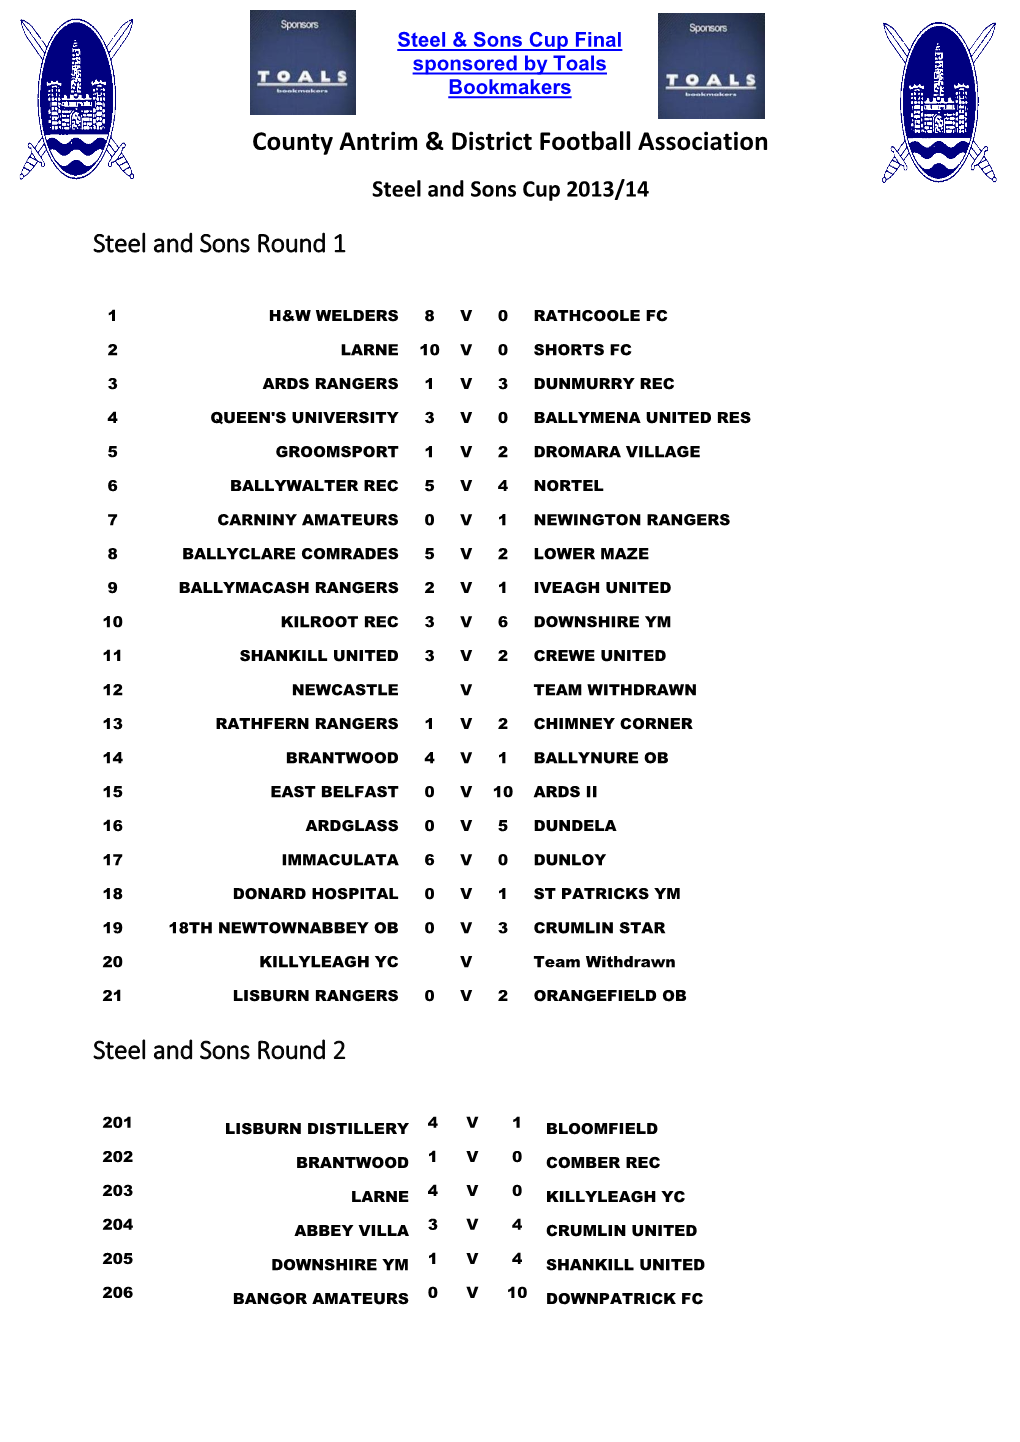 County Antrim & District Football Association Steel and Sons Round